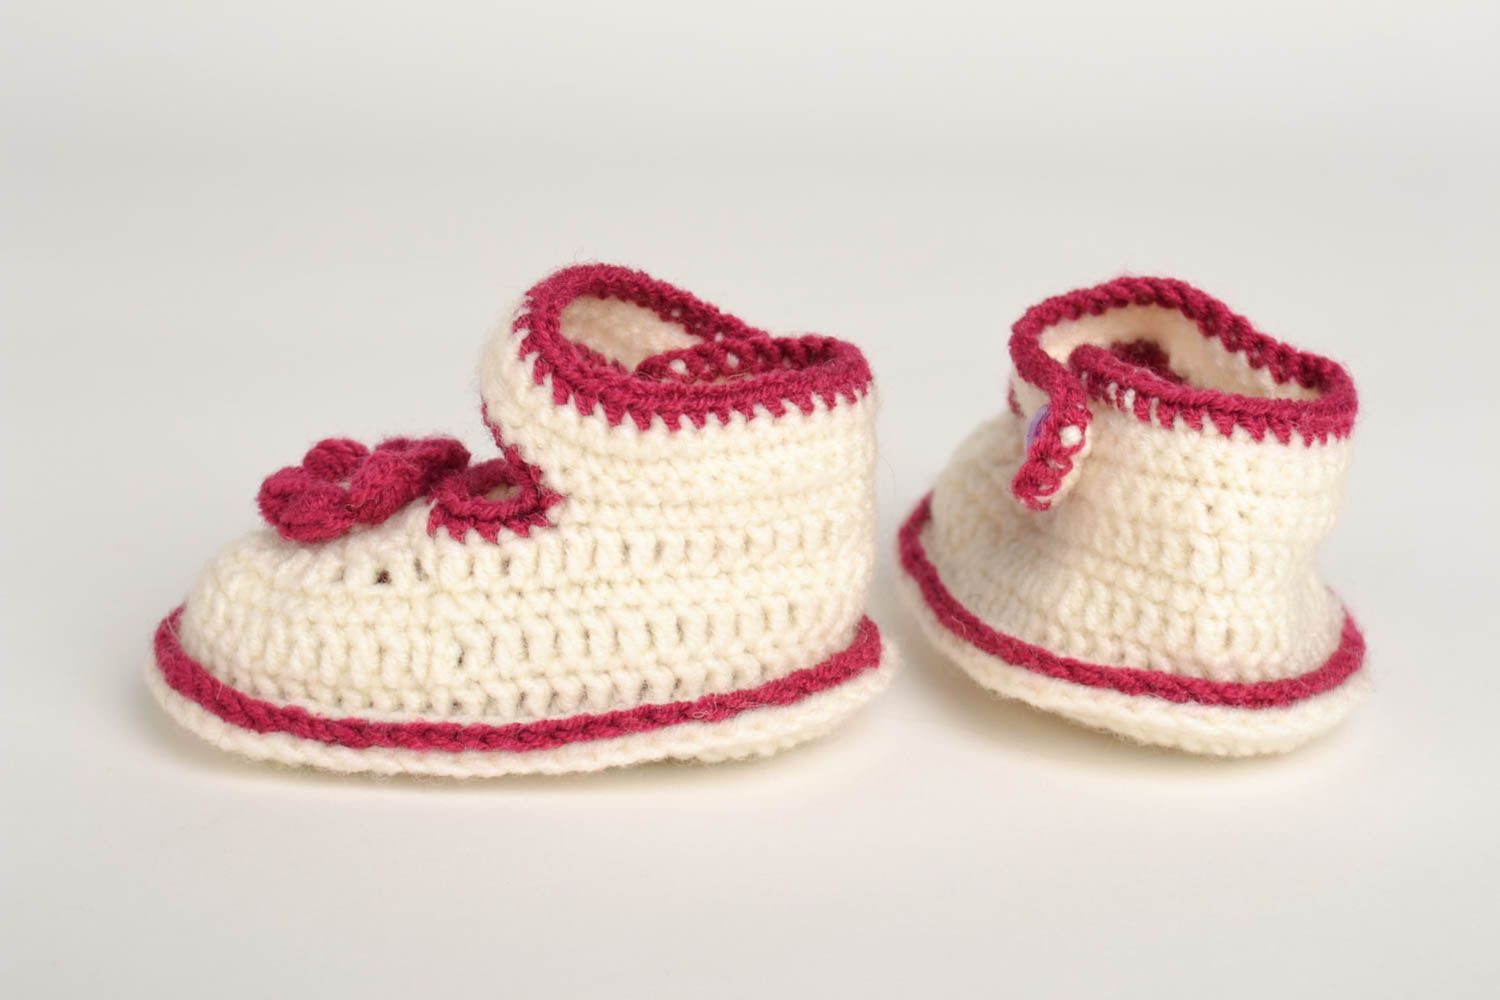 Handmade baby bootees soft crochet baby booties warm booties gifts for kids photo 2